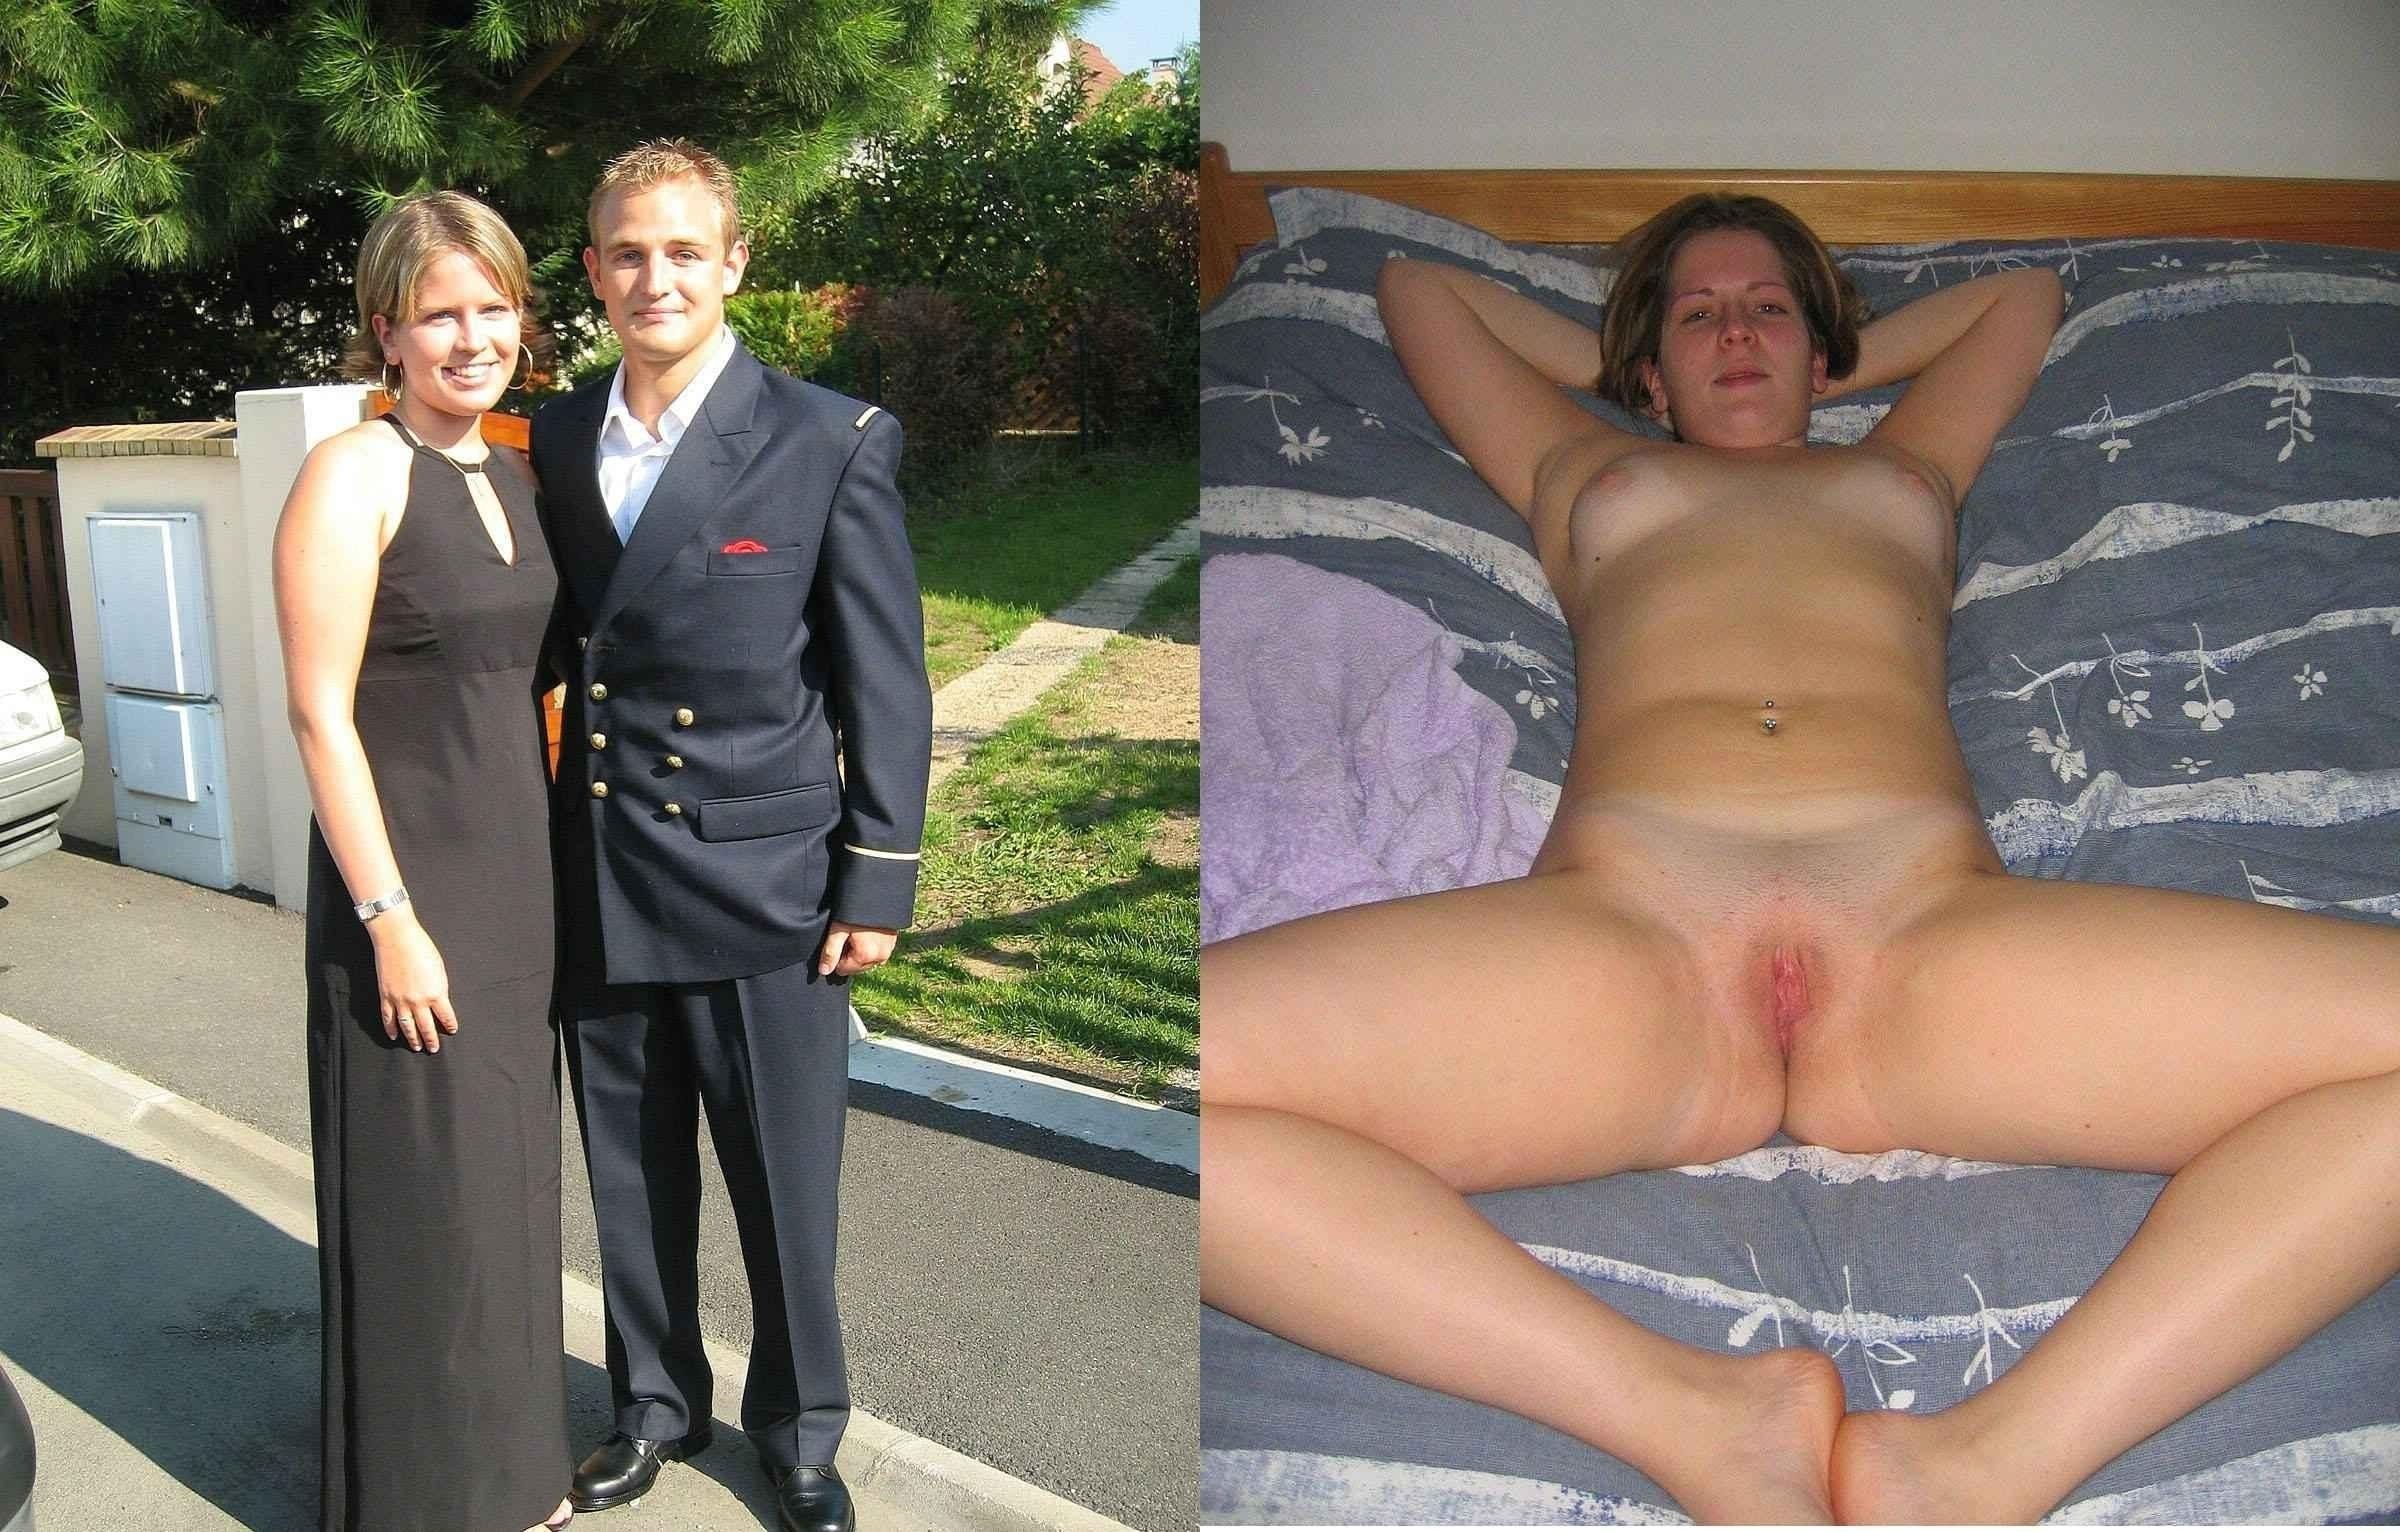 Naked Husband and Clothed WiFe (42 photos)